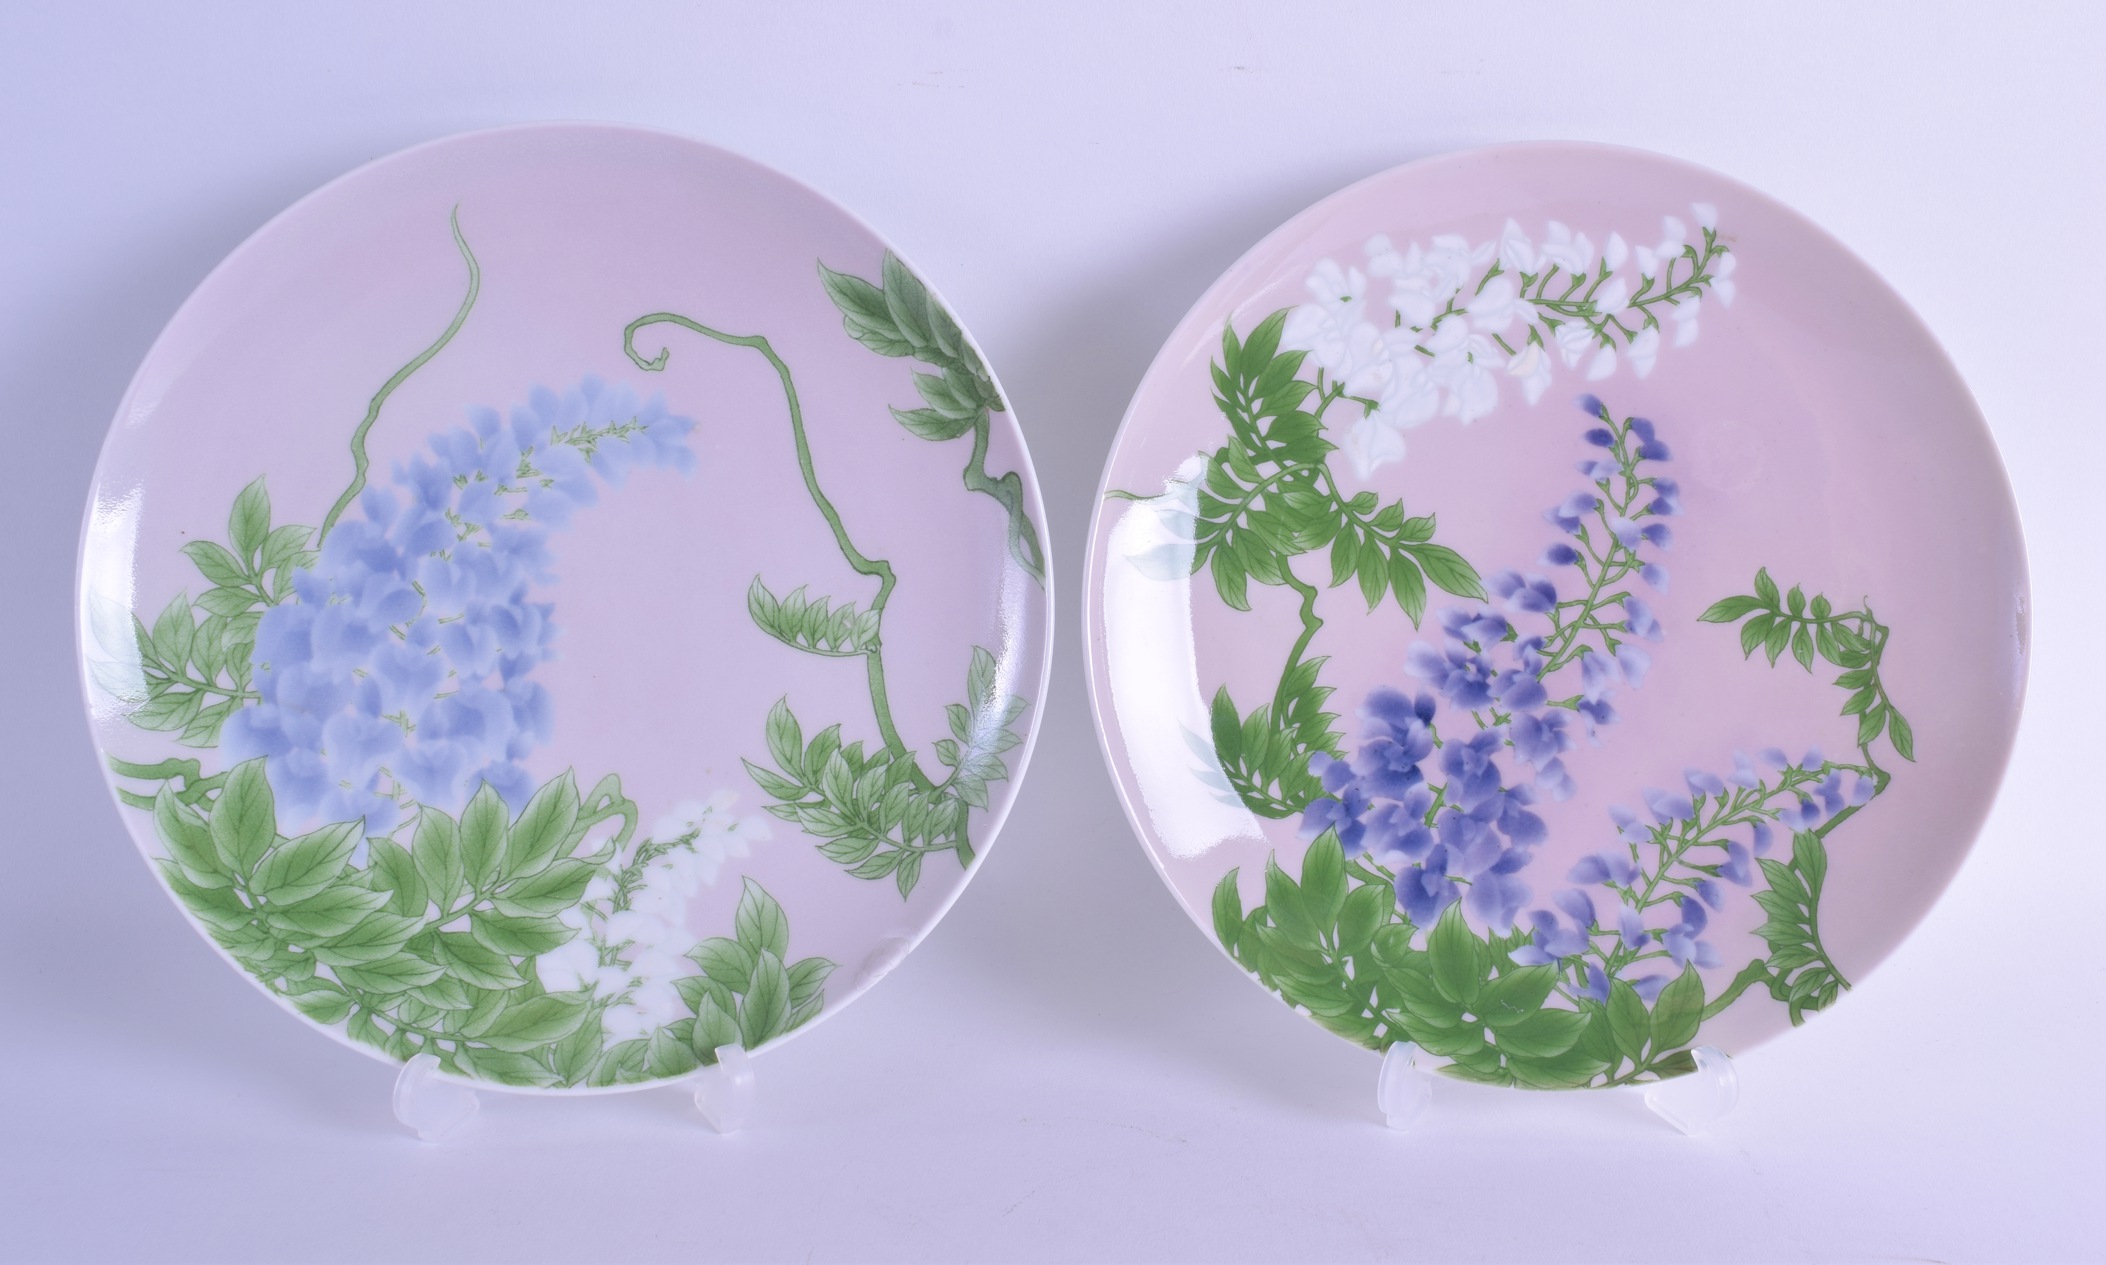 A PAIR OF LATE 19TH CENTURY JAPANESE MEIJI PERIOD PLATES by Makuzu Kozan, painted with floral